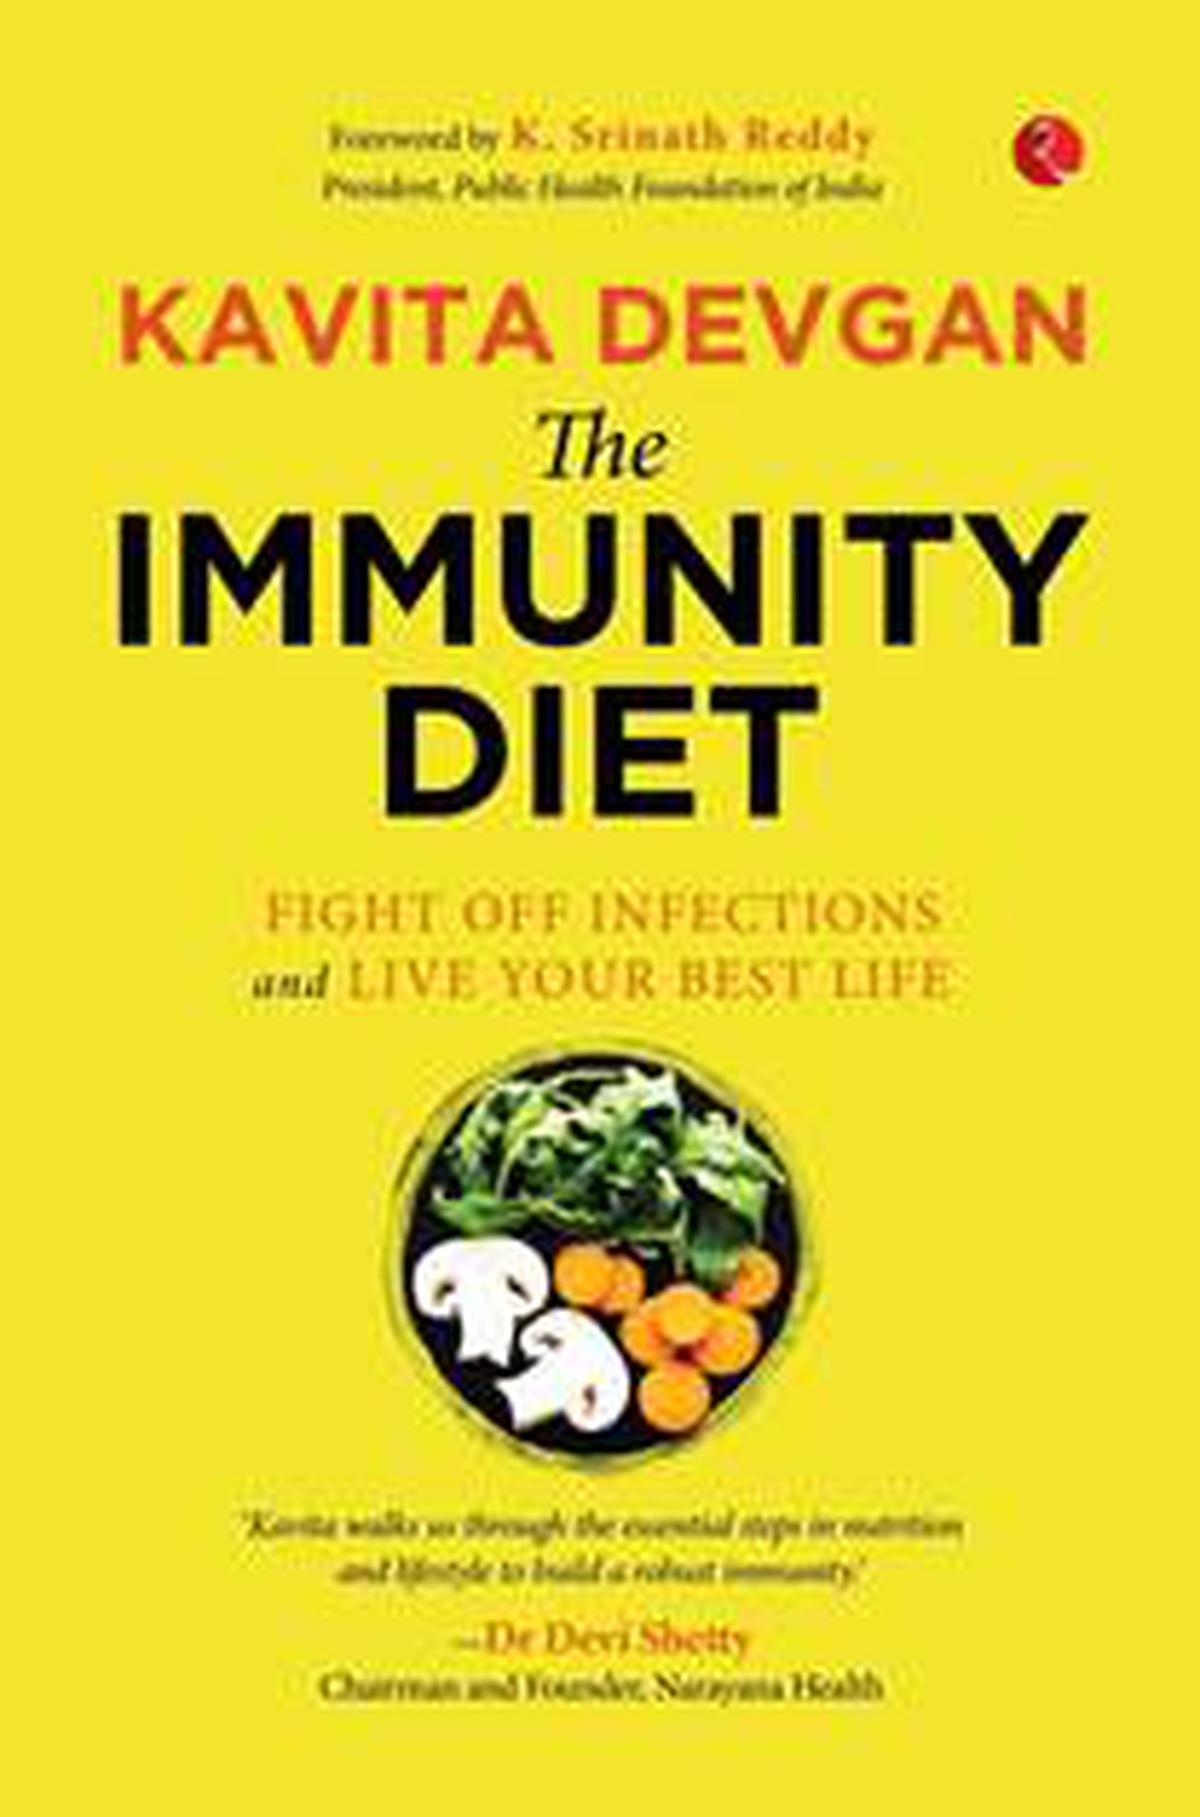 Health Books for May: The Immunity Diet